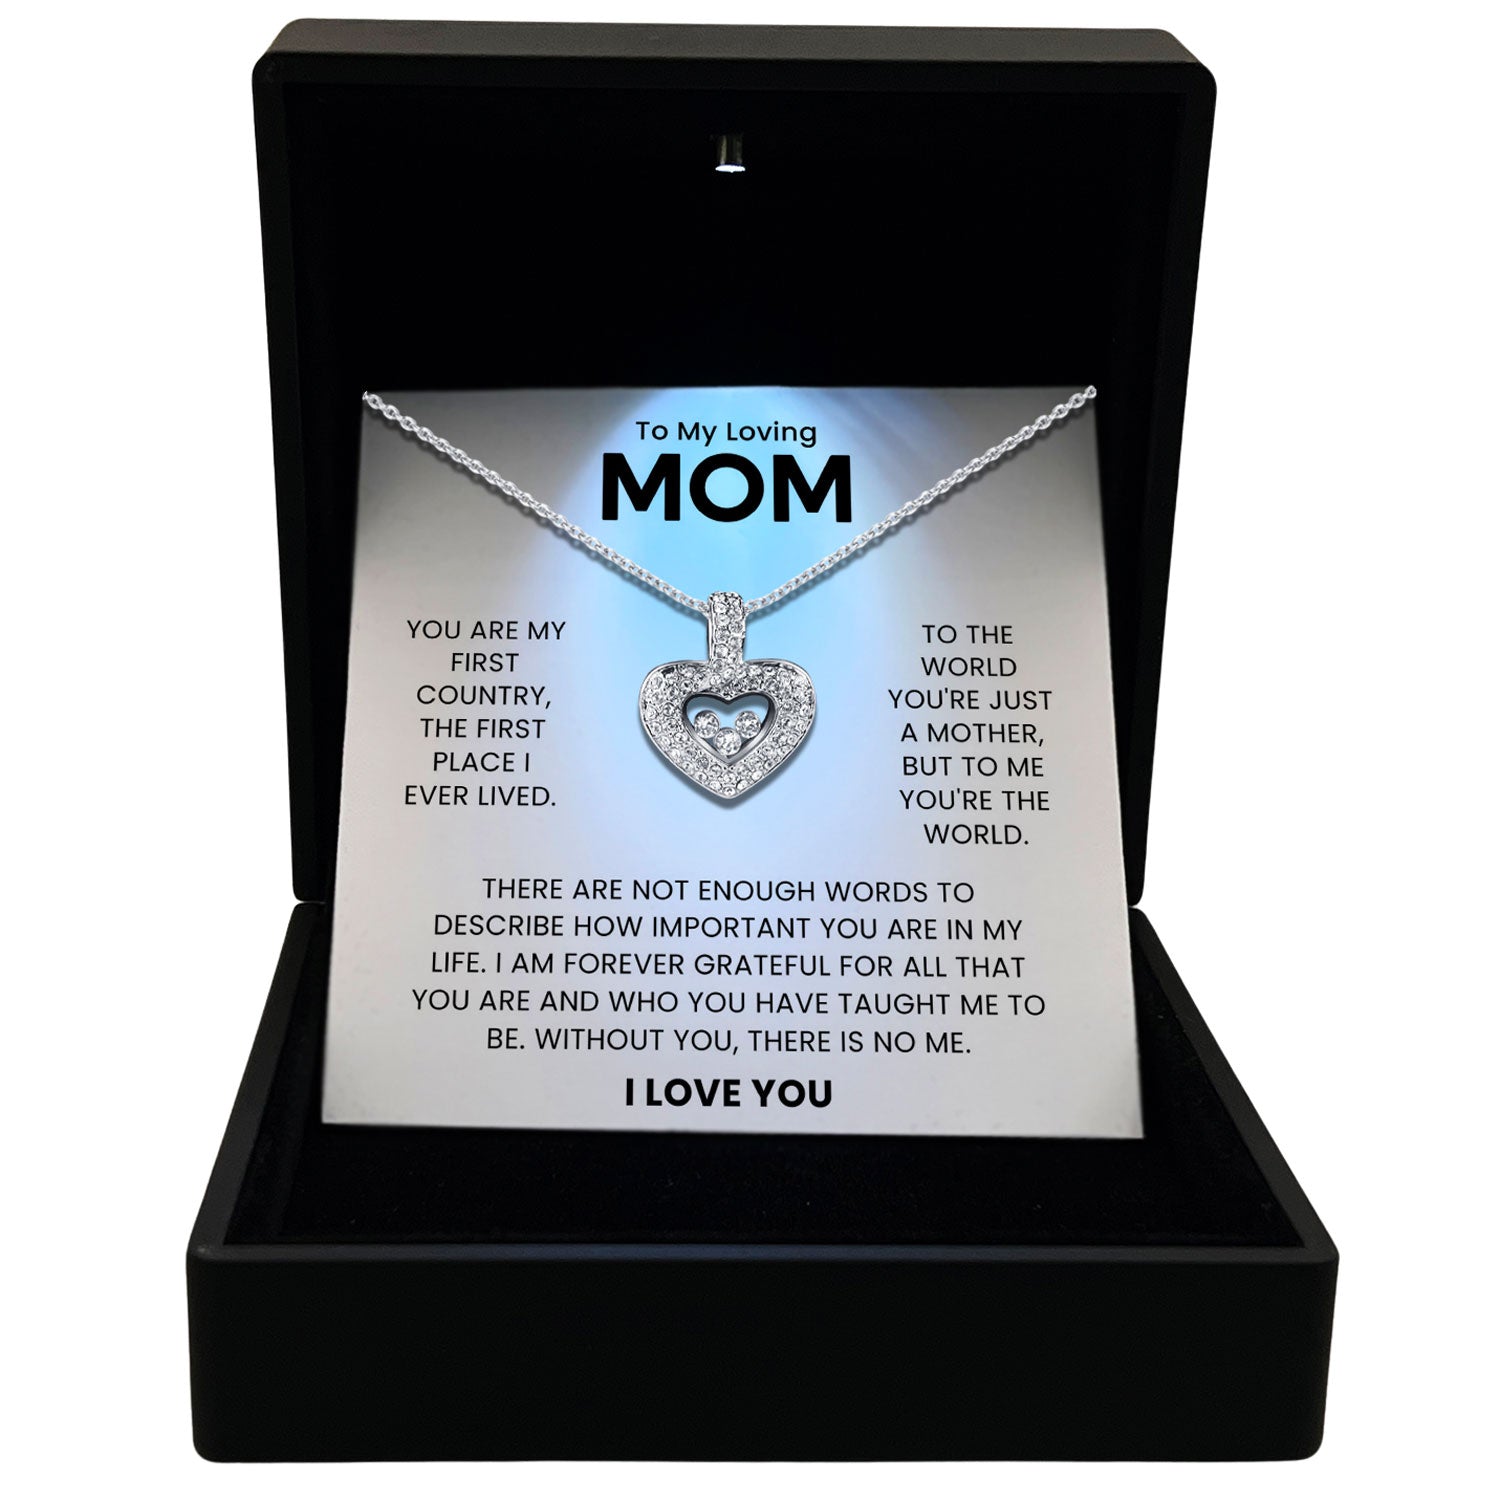 To My Loving Mom - You Are My First Country - Tryndi Floating Heart Necklace